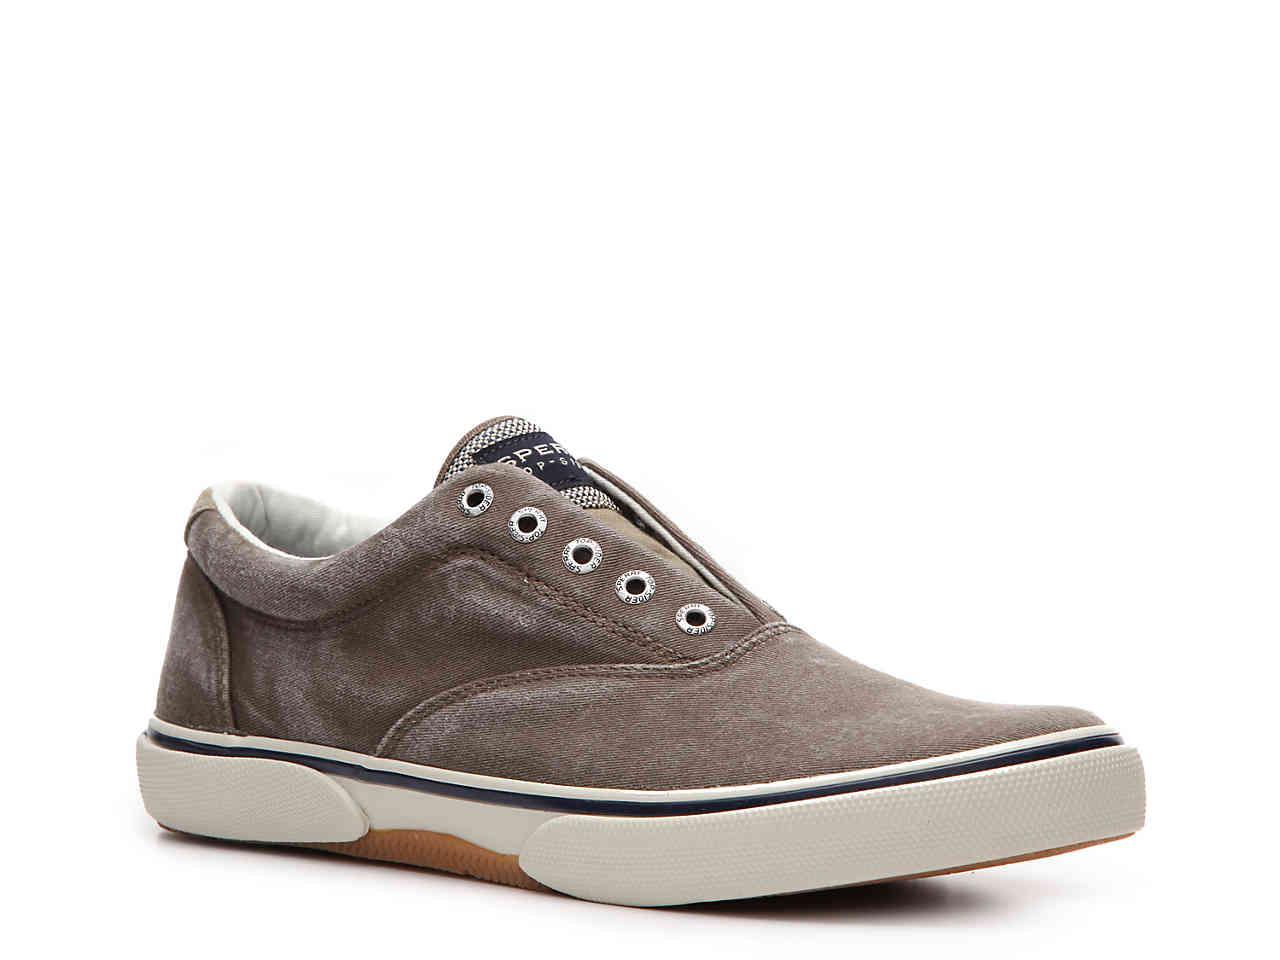 Sperry Top-Sider Canvas Halyard Laceless Slip-on Sneaker in Light Brown ...